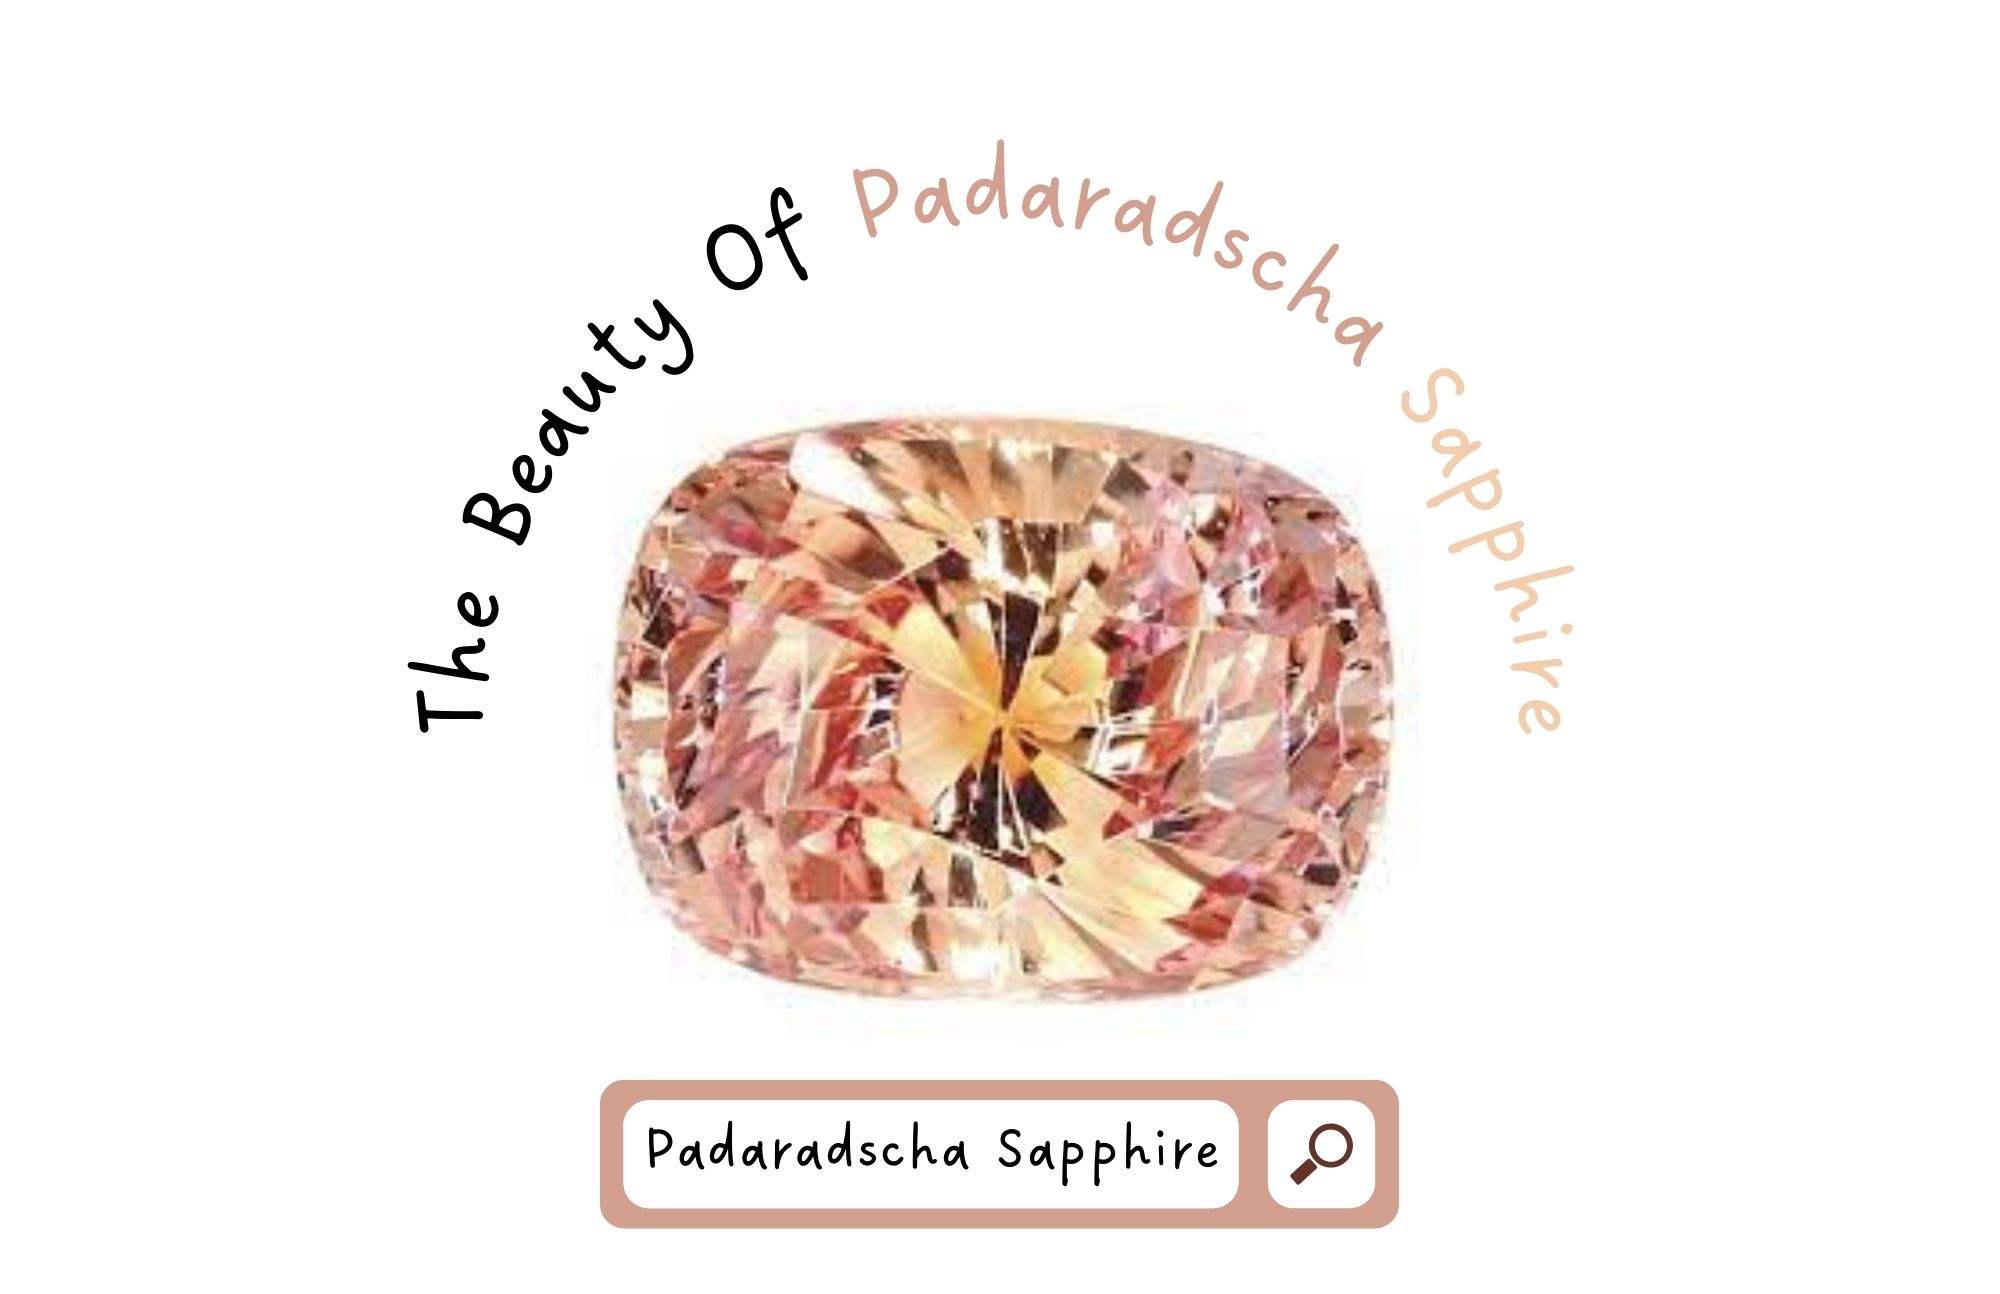 Padparadscha Sapphire - The Hidden Treasure Behind This Difficult To Pronounce Gem